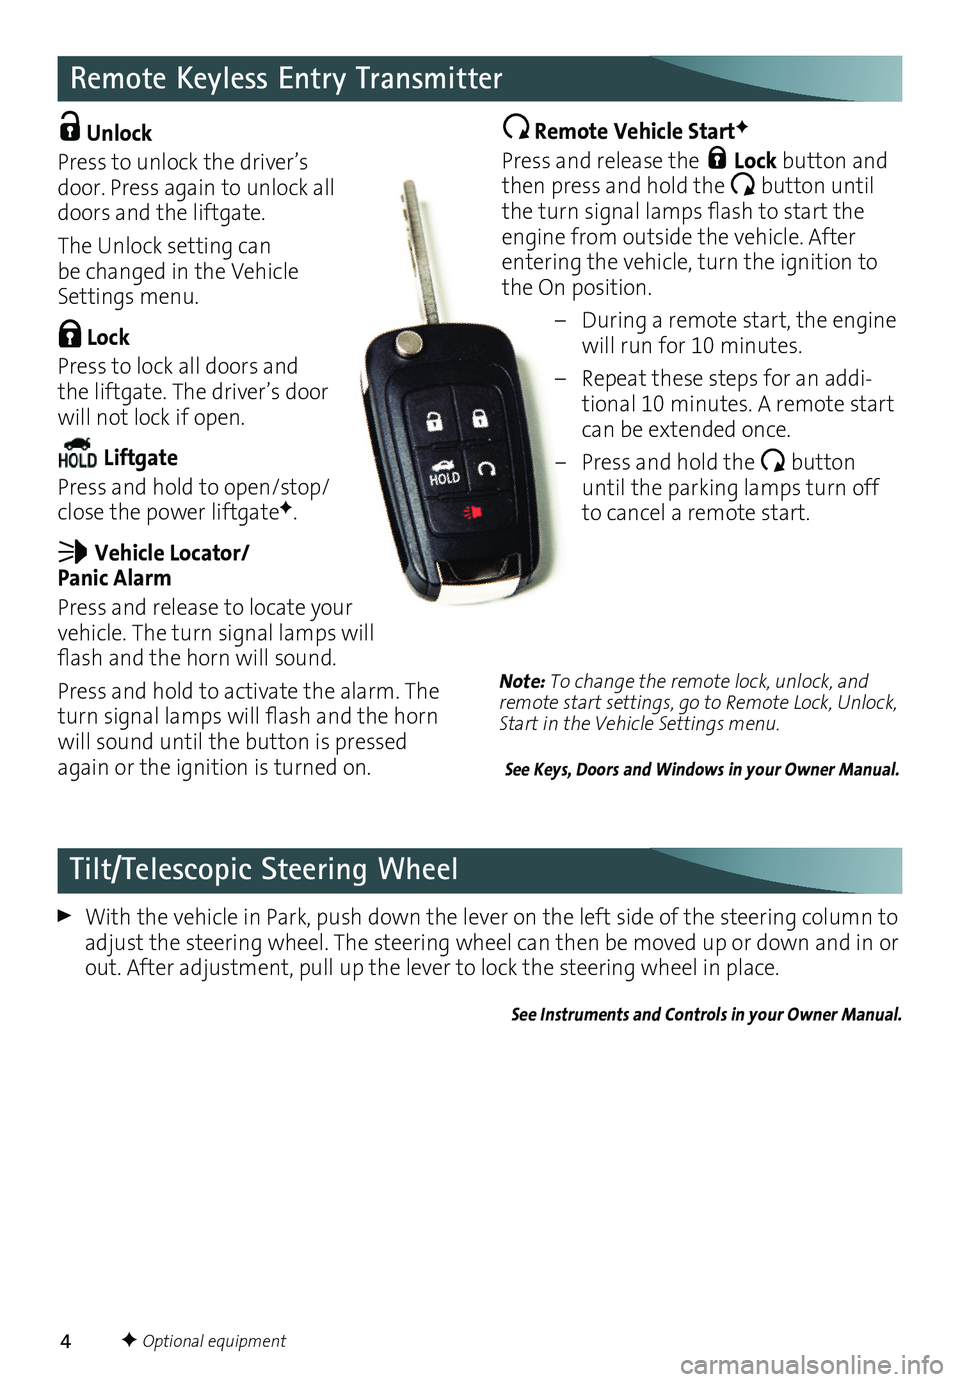 GMC TERRAIN 2016  Get To Know Guide 4
Remote Keyless Entry Transmitter
 Unlock 
Press to unlock the driver’s door . Press again to unlock all doors and the liftgate . 
The Unlock setting can be changed in the Vehicle Settings menu .
 